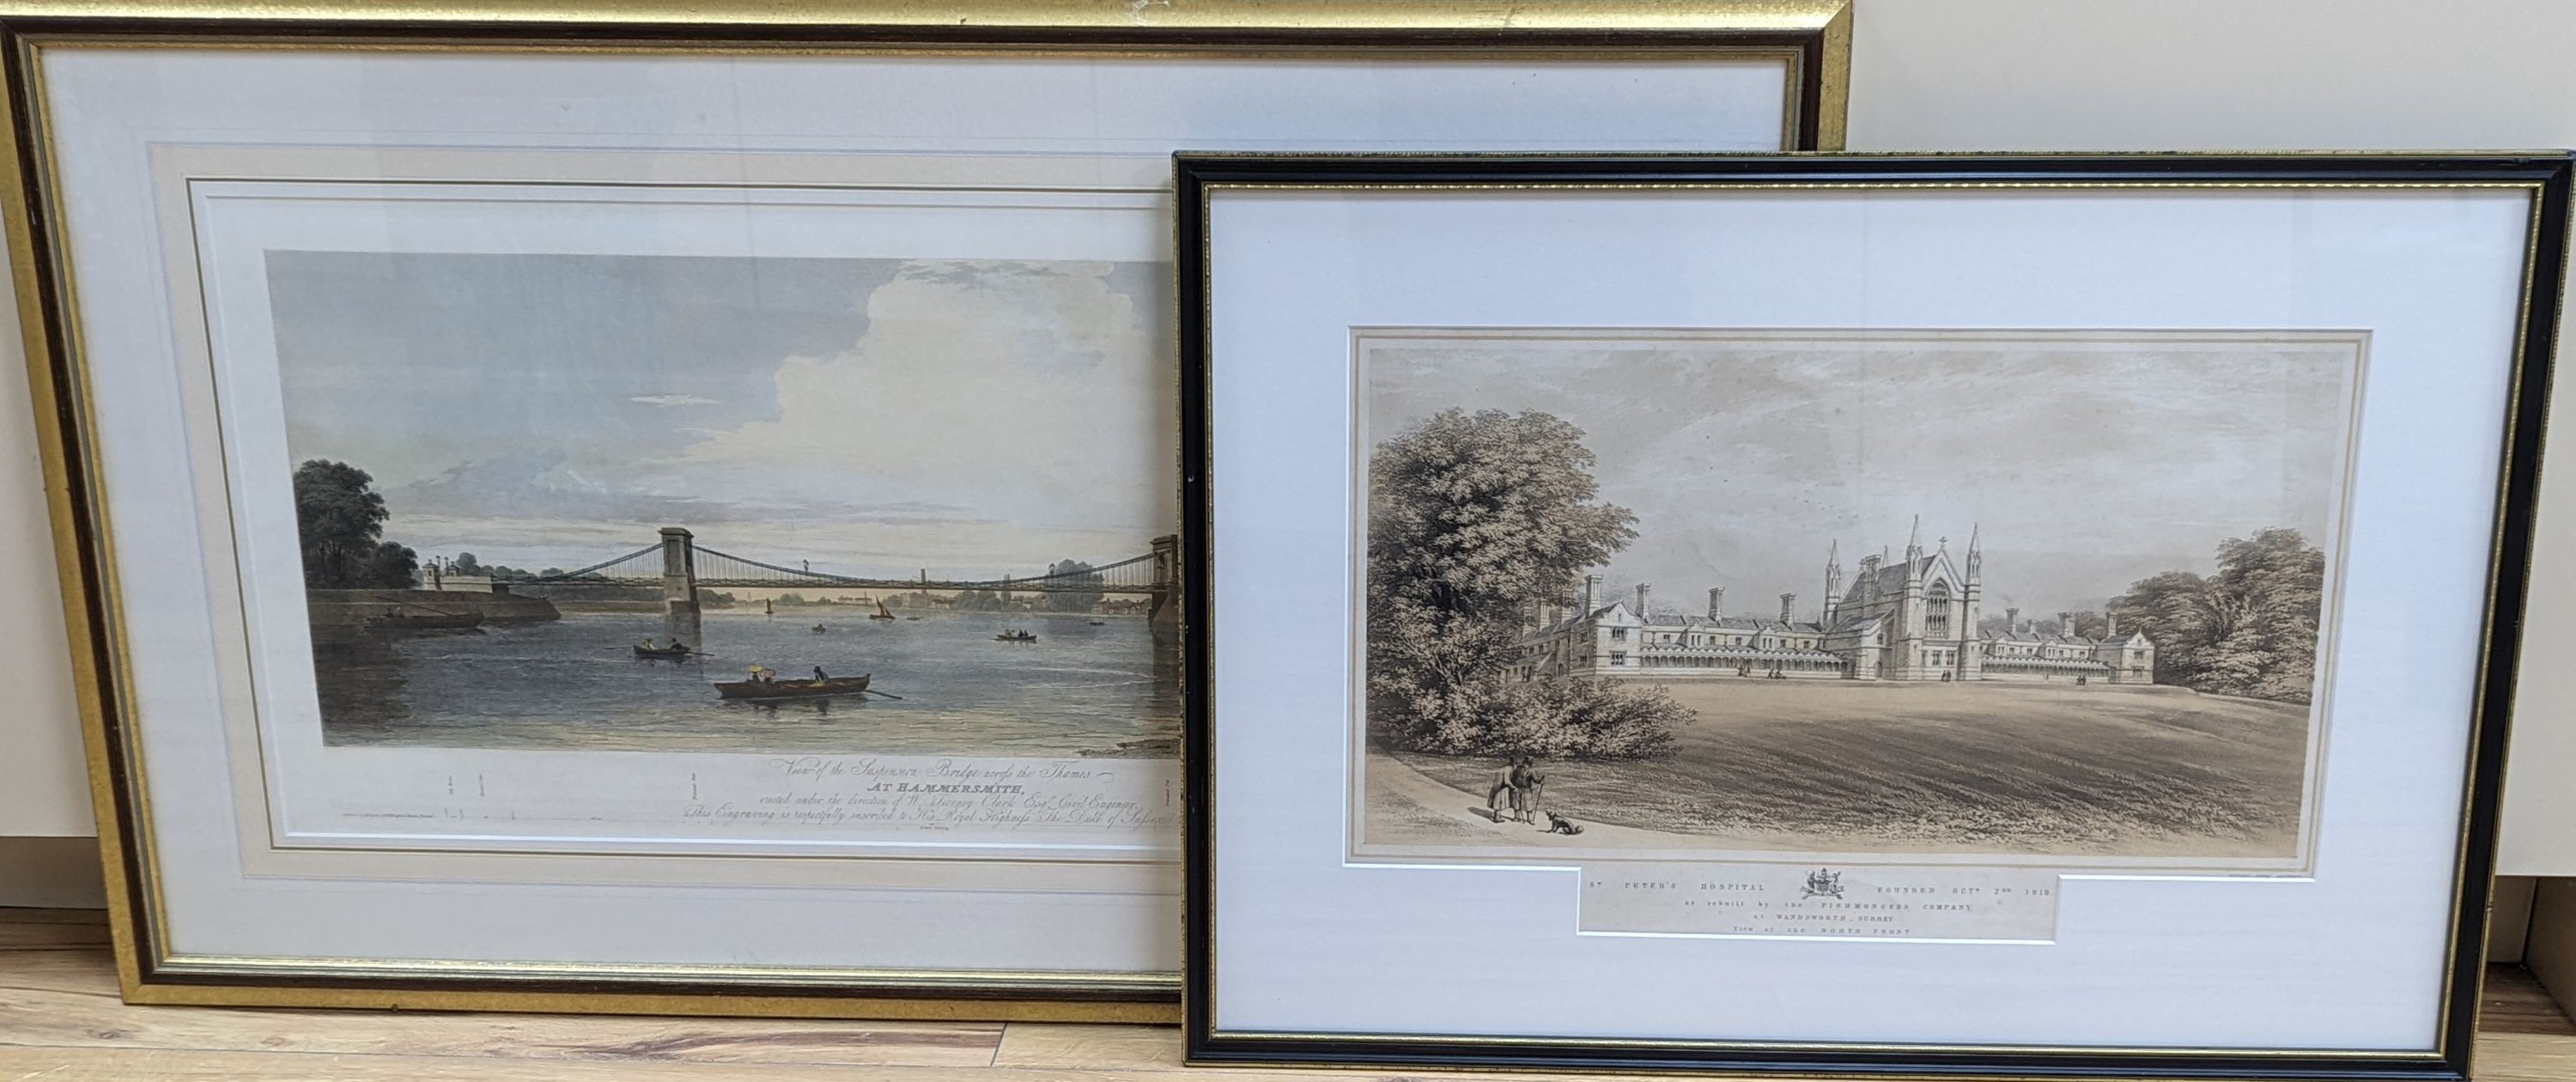 Letitia Byrne, coloured engraving, View of the Suspension Bridge across The Thames at Hammersmith, 36 x 75cm and a lithograph by Richard Sitter of St Peter's Hospital, Wandsworth, 28 x 50cm